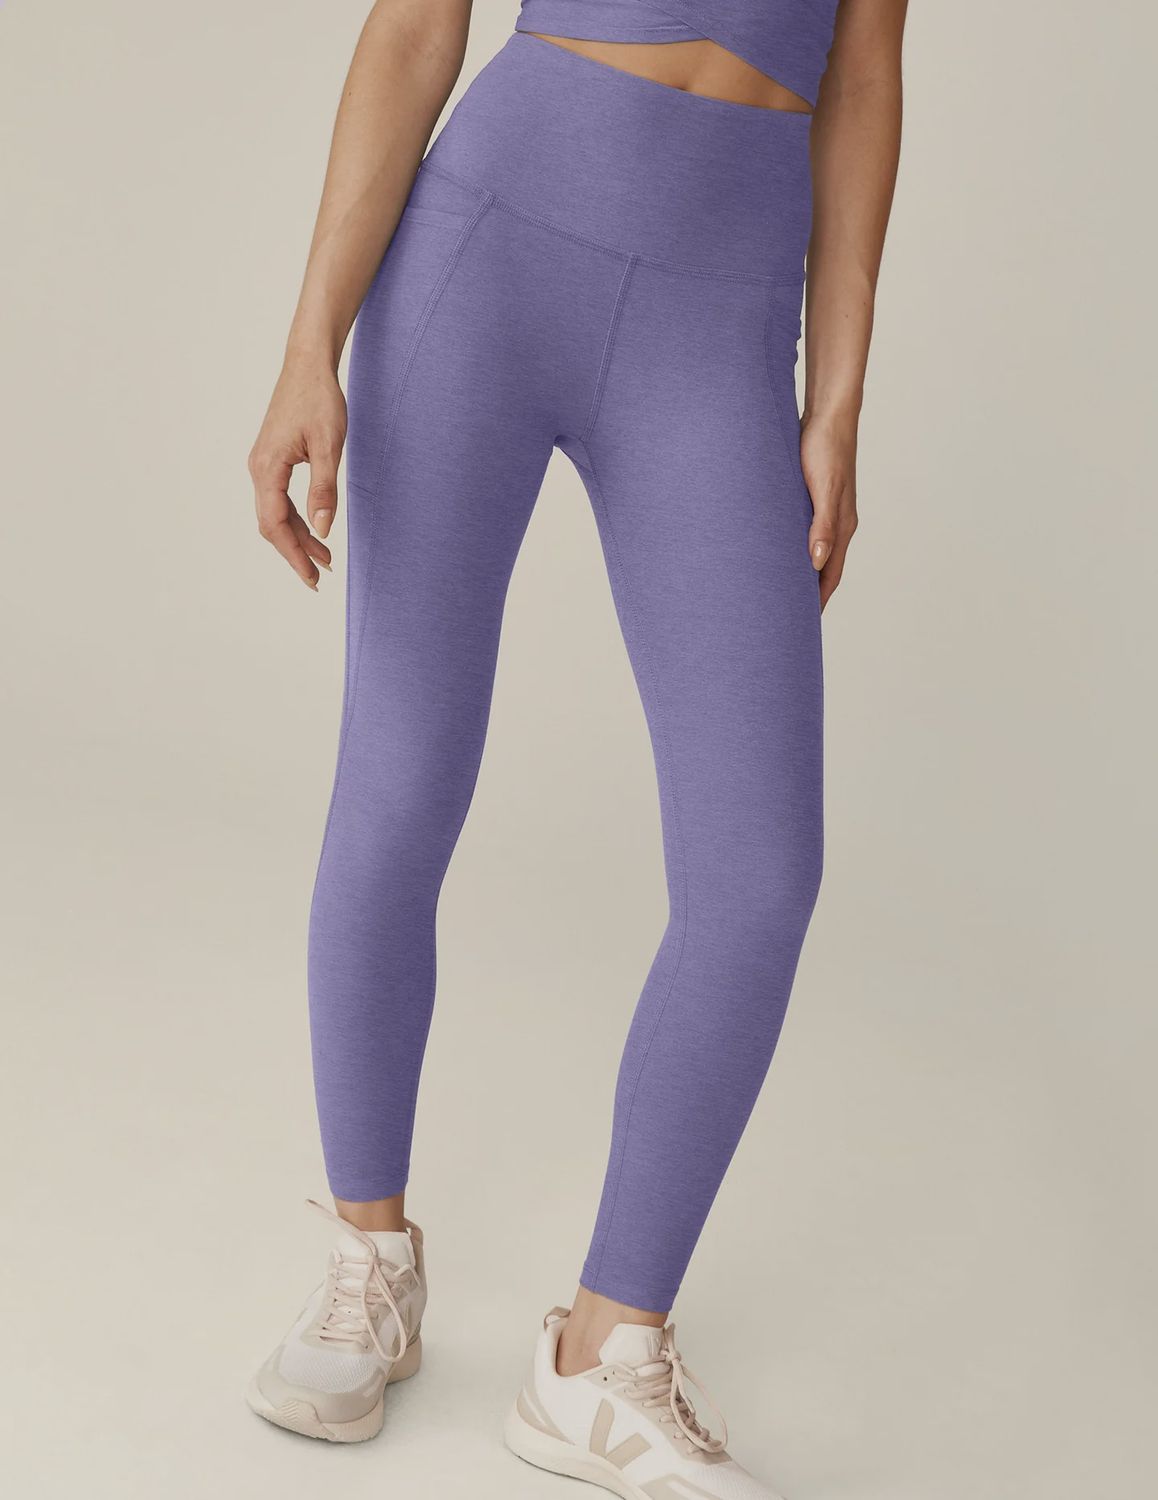 Spacedye Out of Pocket Midi High Waisted Legging, Color: Indigo Heather, Size: XS